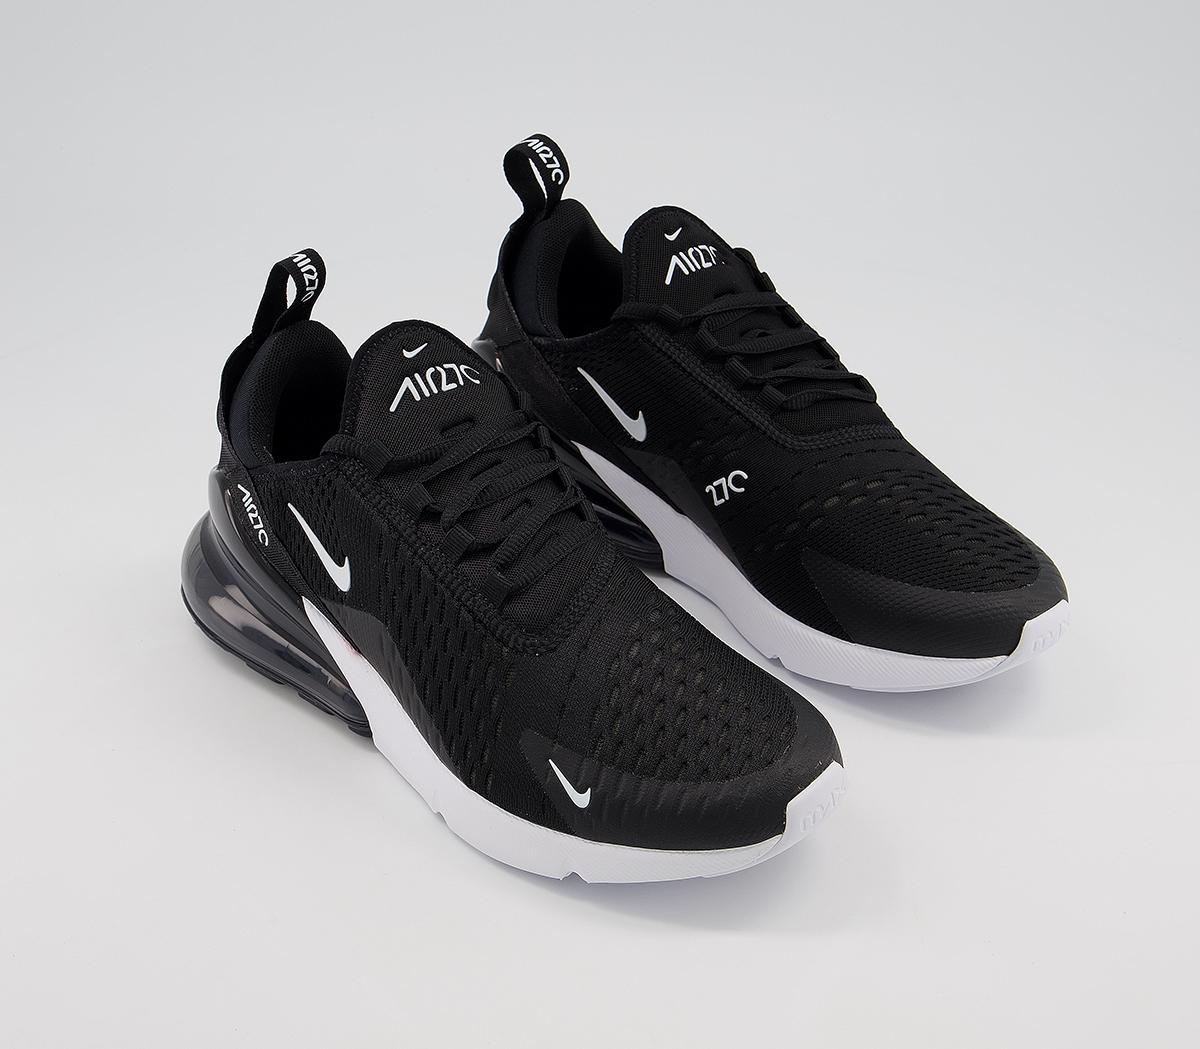 Nike Air Max 270 Trainers Black Anthracite White F - Hers trainers